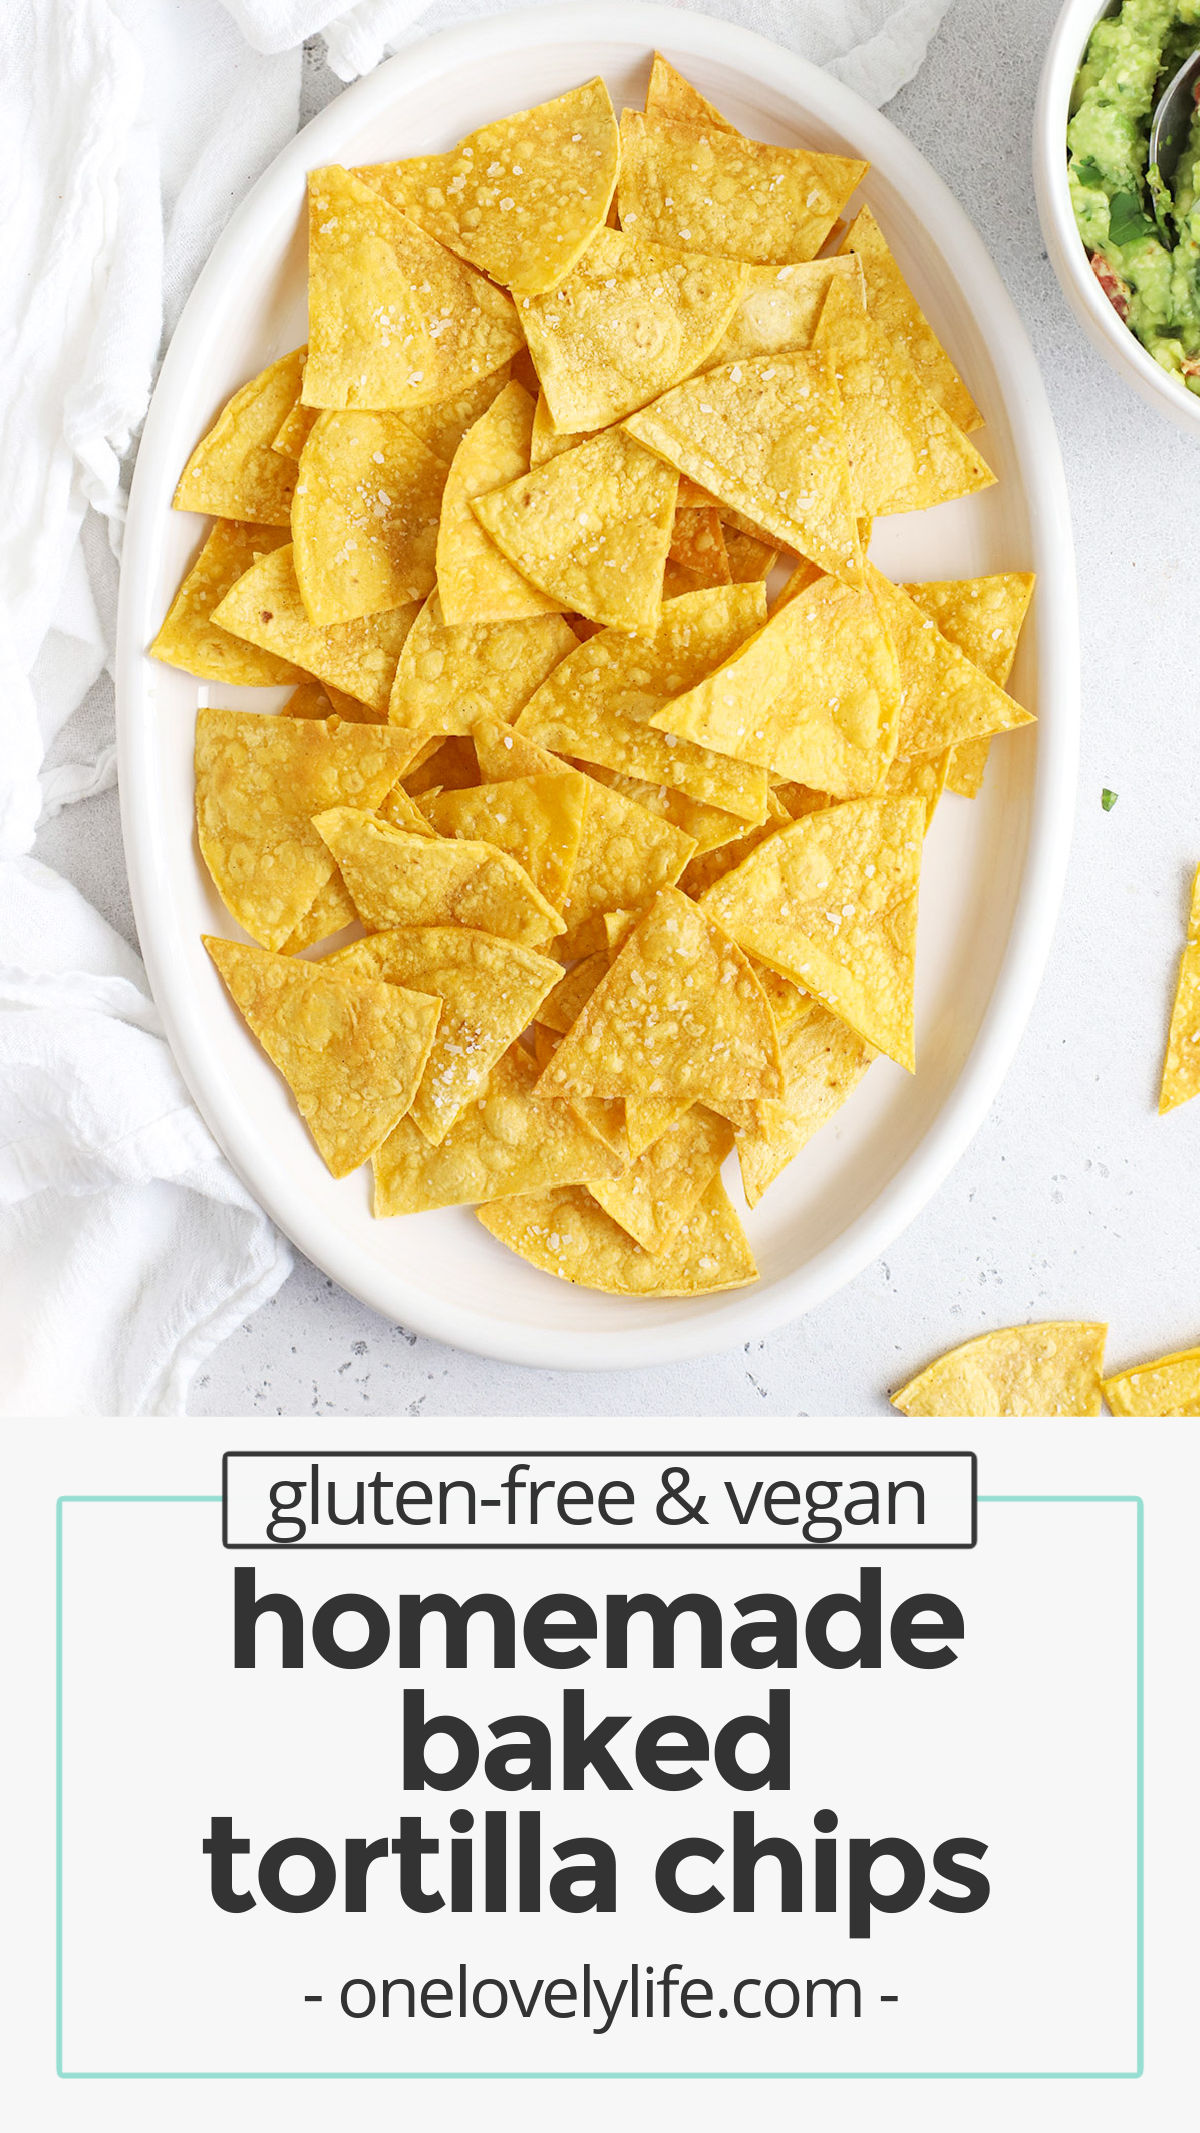 Baked Tortilla Chips - It's easy to make homemade tortilla chips in the oven! We love their salty, crispy crunch with salsa, guacamole & more. // healthy tortilla chips // healthy baked chips // baked chips // baked tortilla chips recipe // healthy tortilla chips recipe //